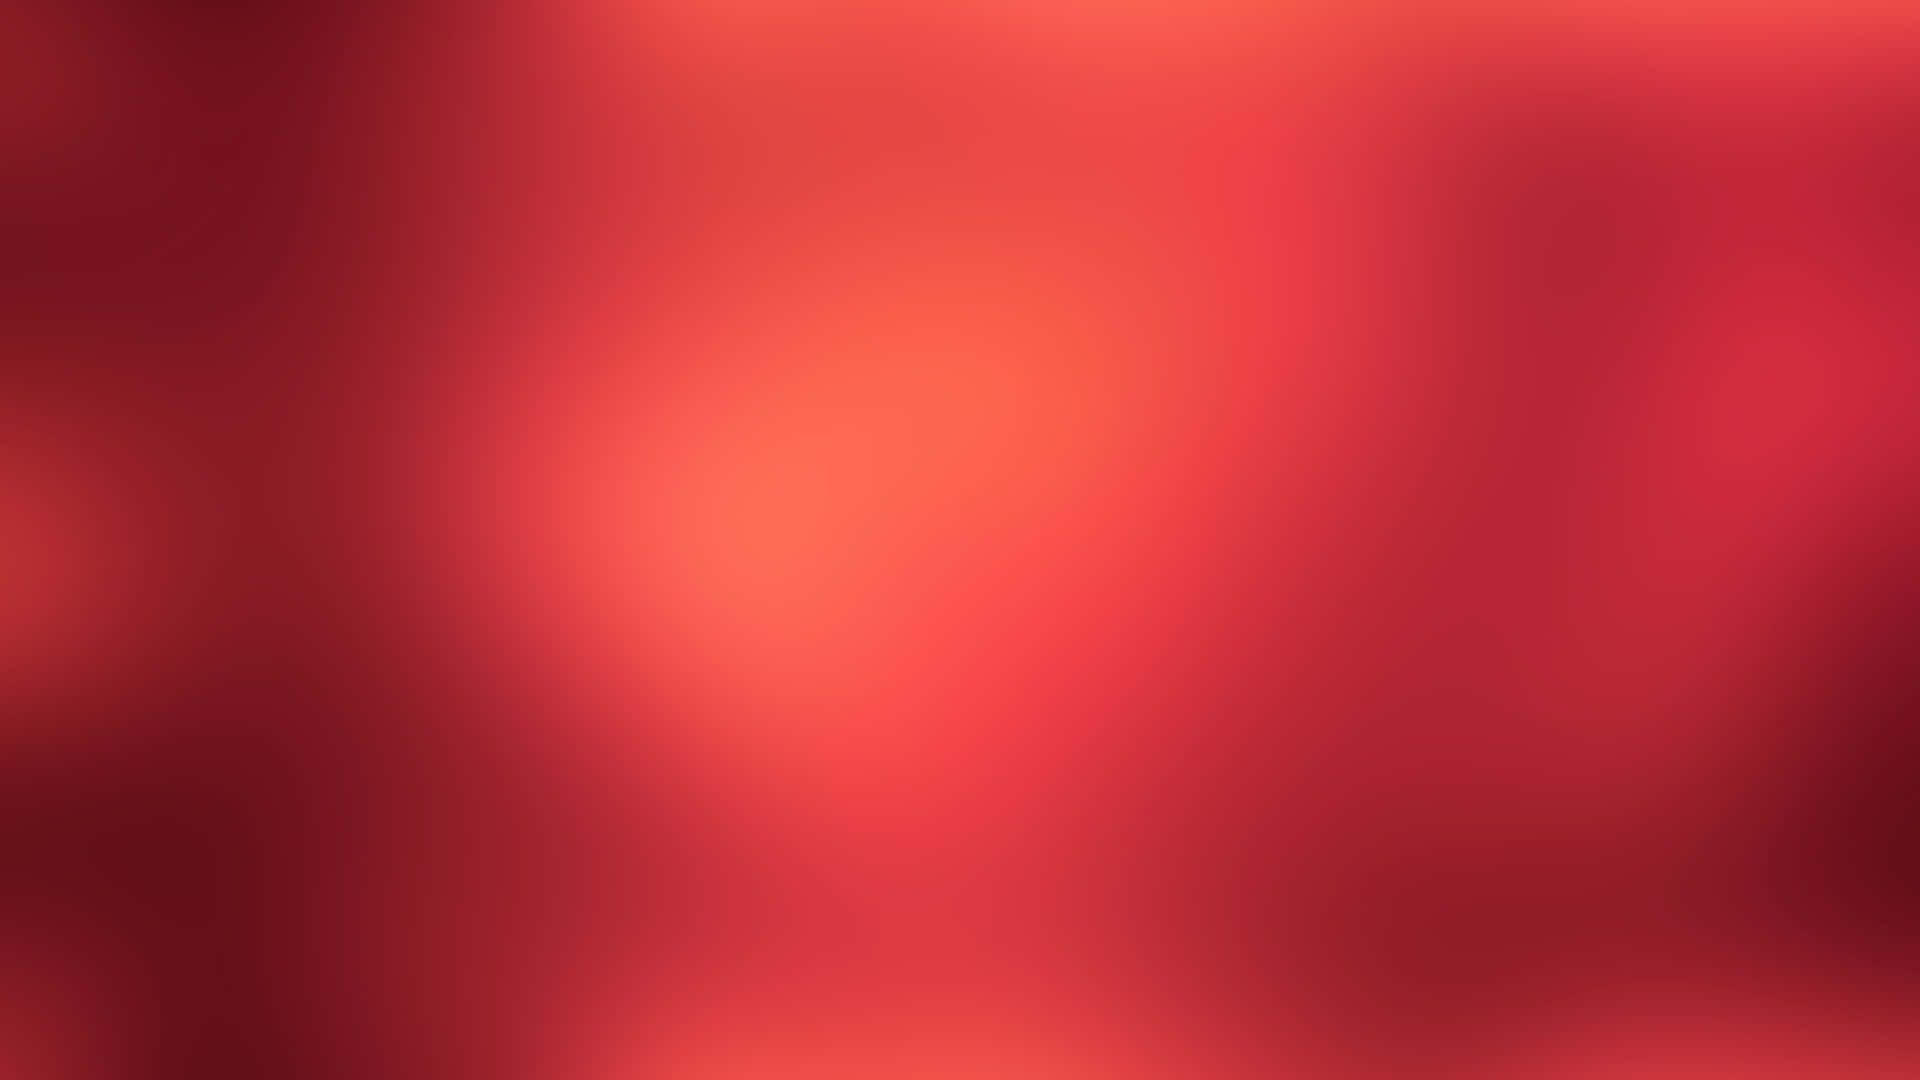 Vibrant Solid Red Background